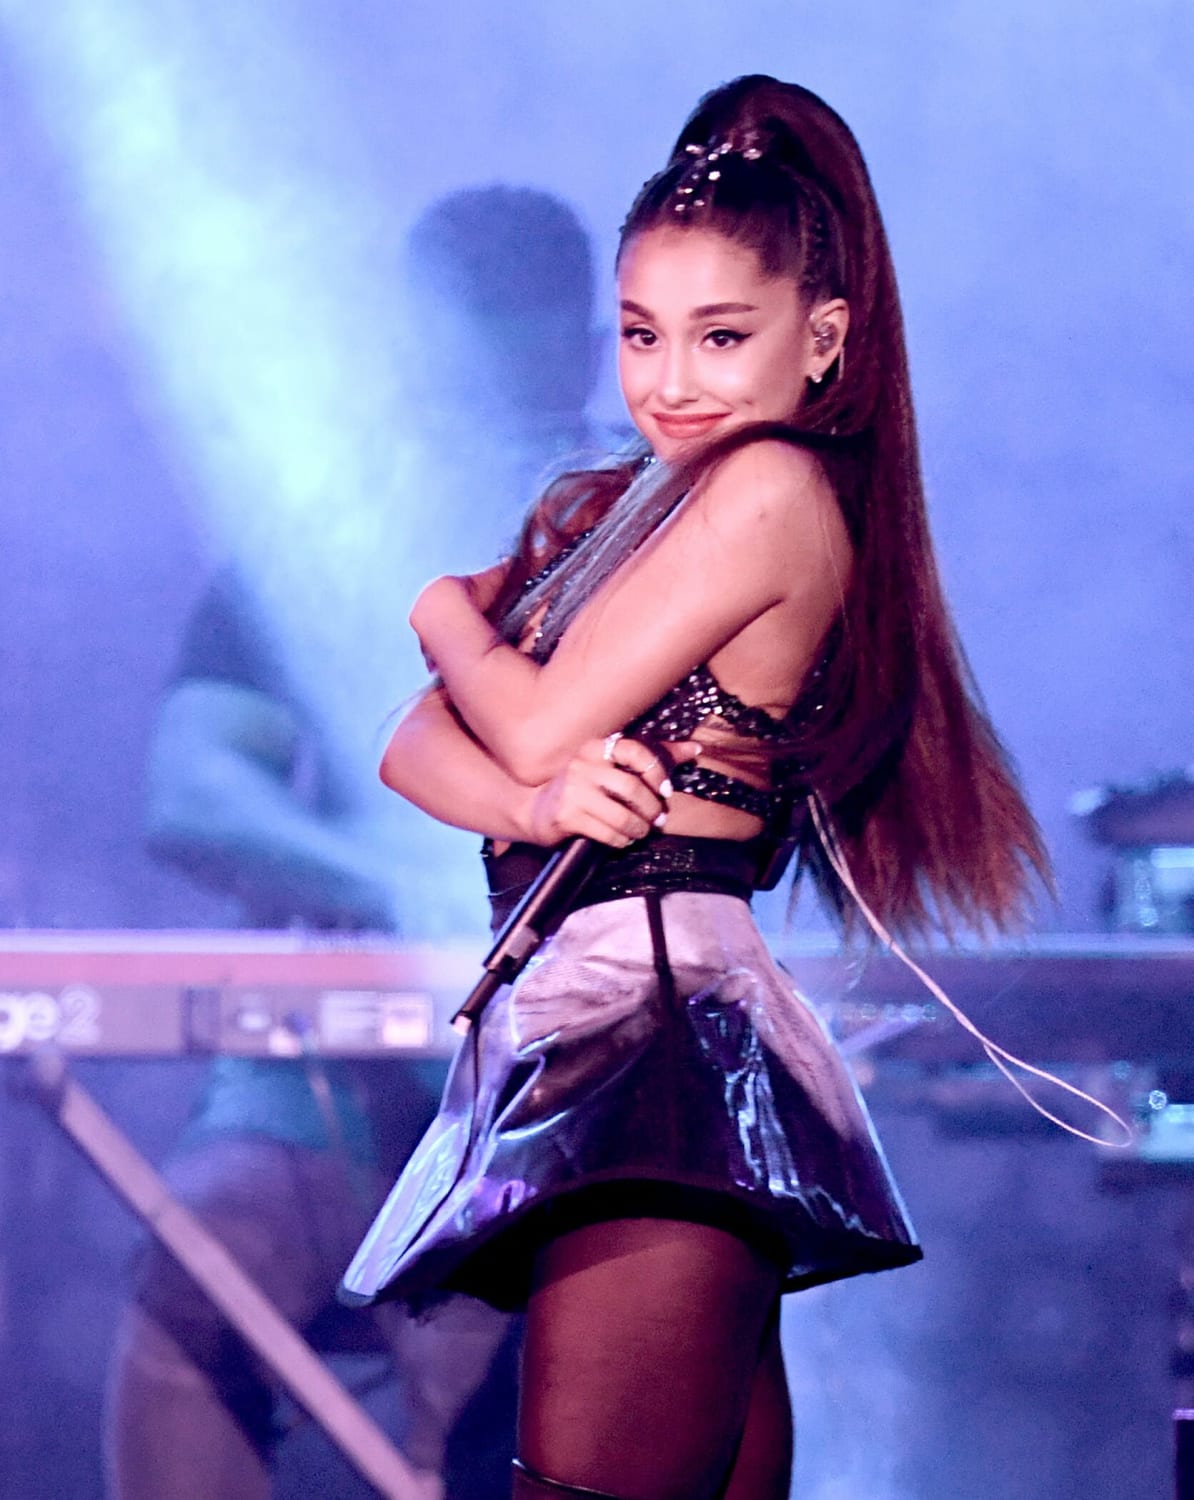 Ariana Grande's Video for Thank U, Next is the Perfect Friday Treat